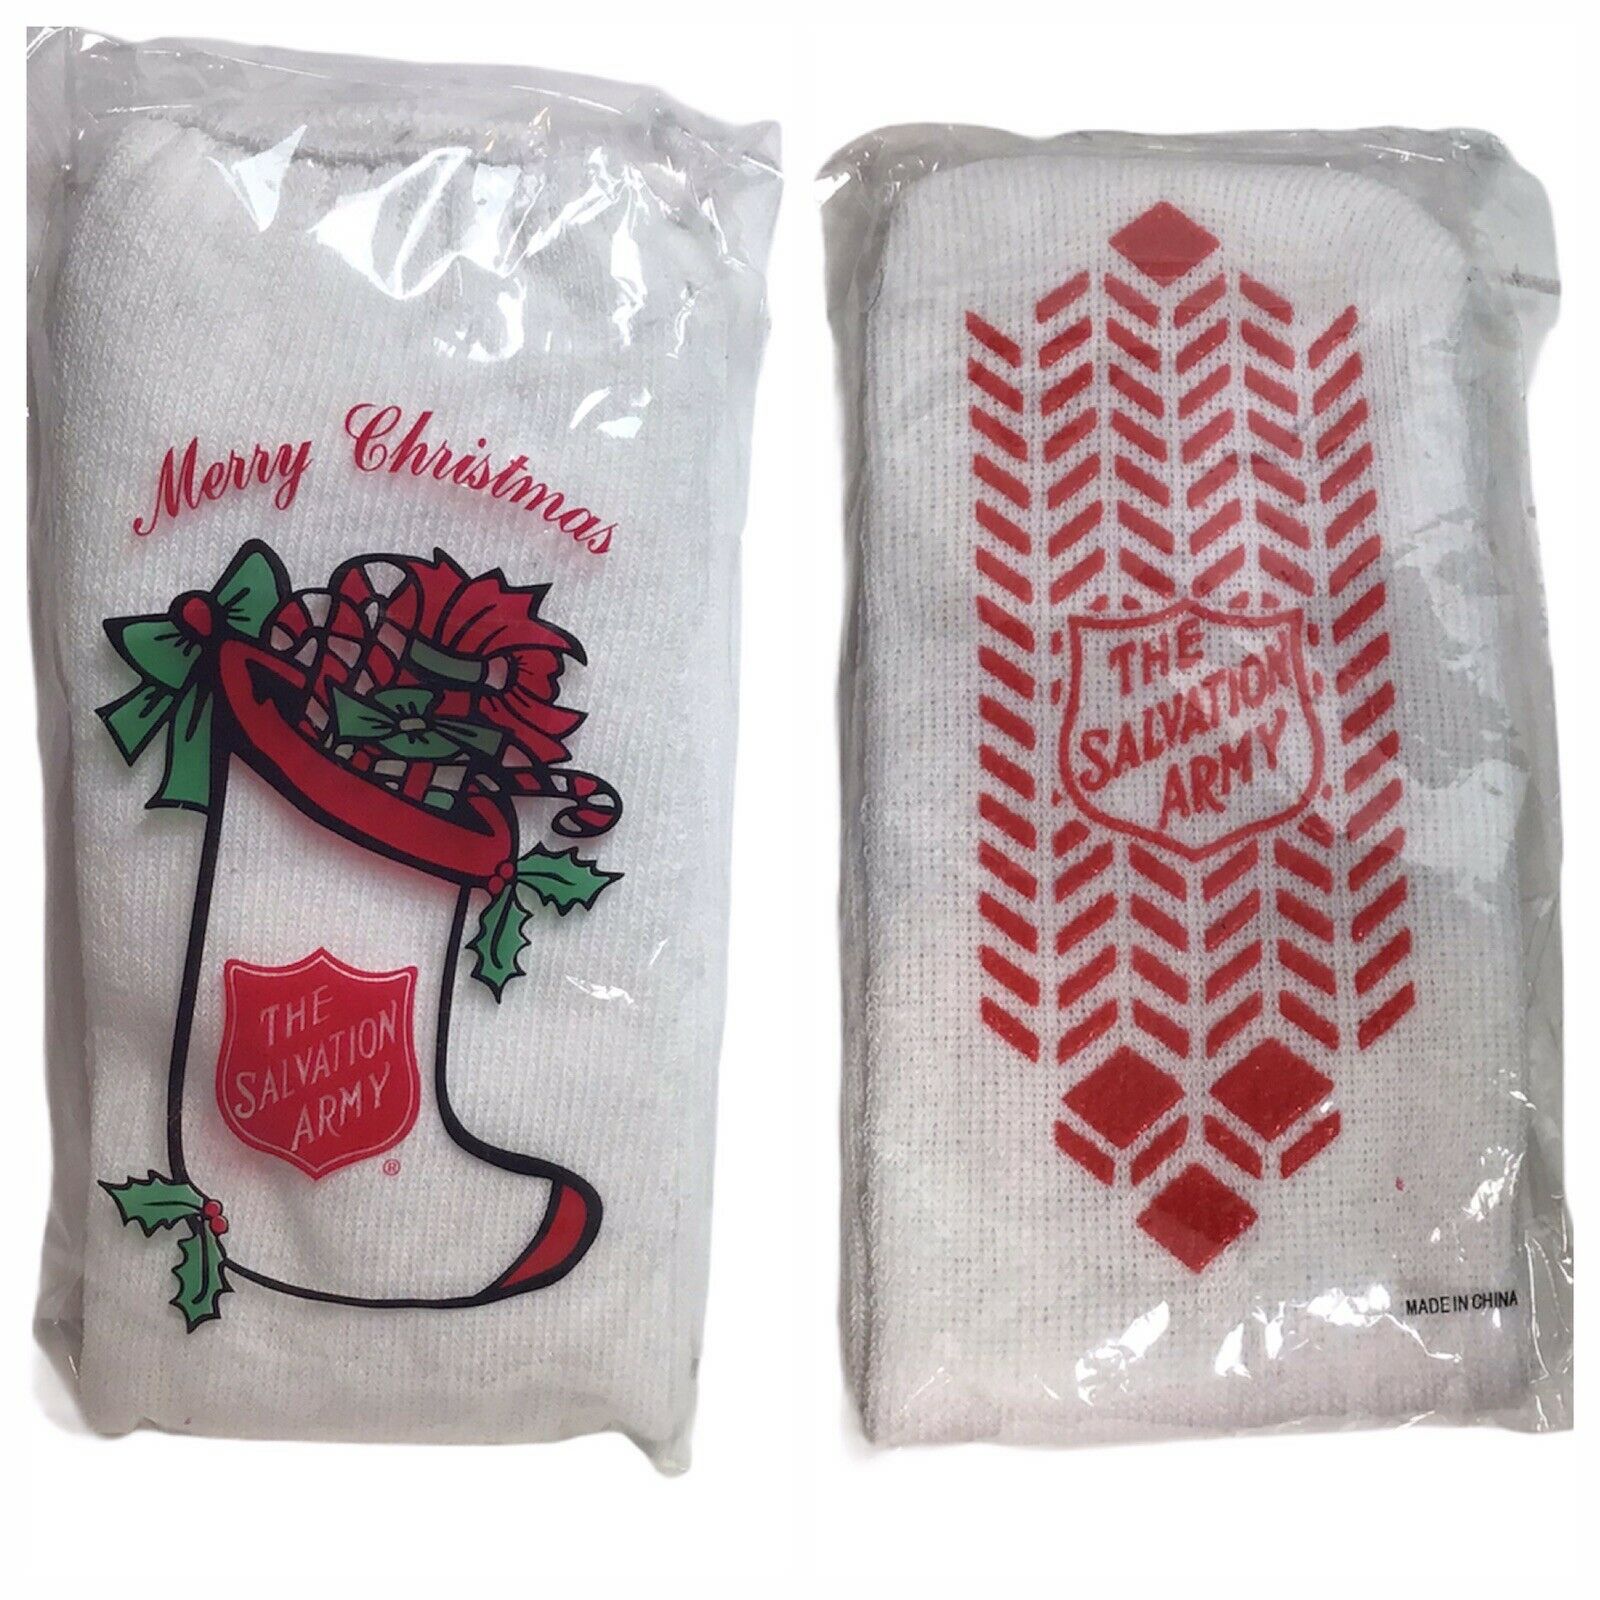 Vintage Salvation Army Socks Merry Christmas Packaging Nos Hard To Find